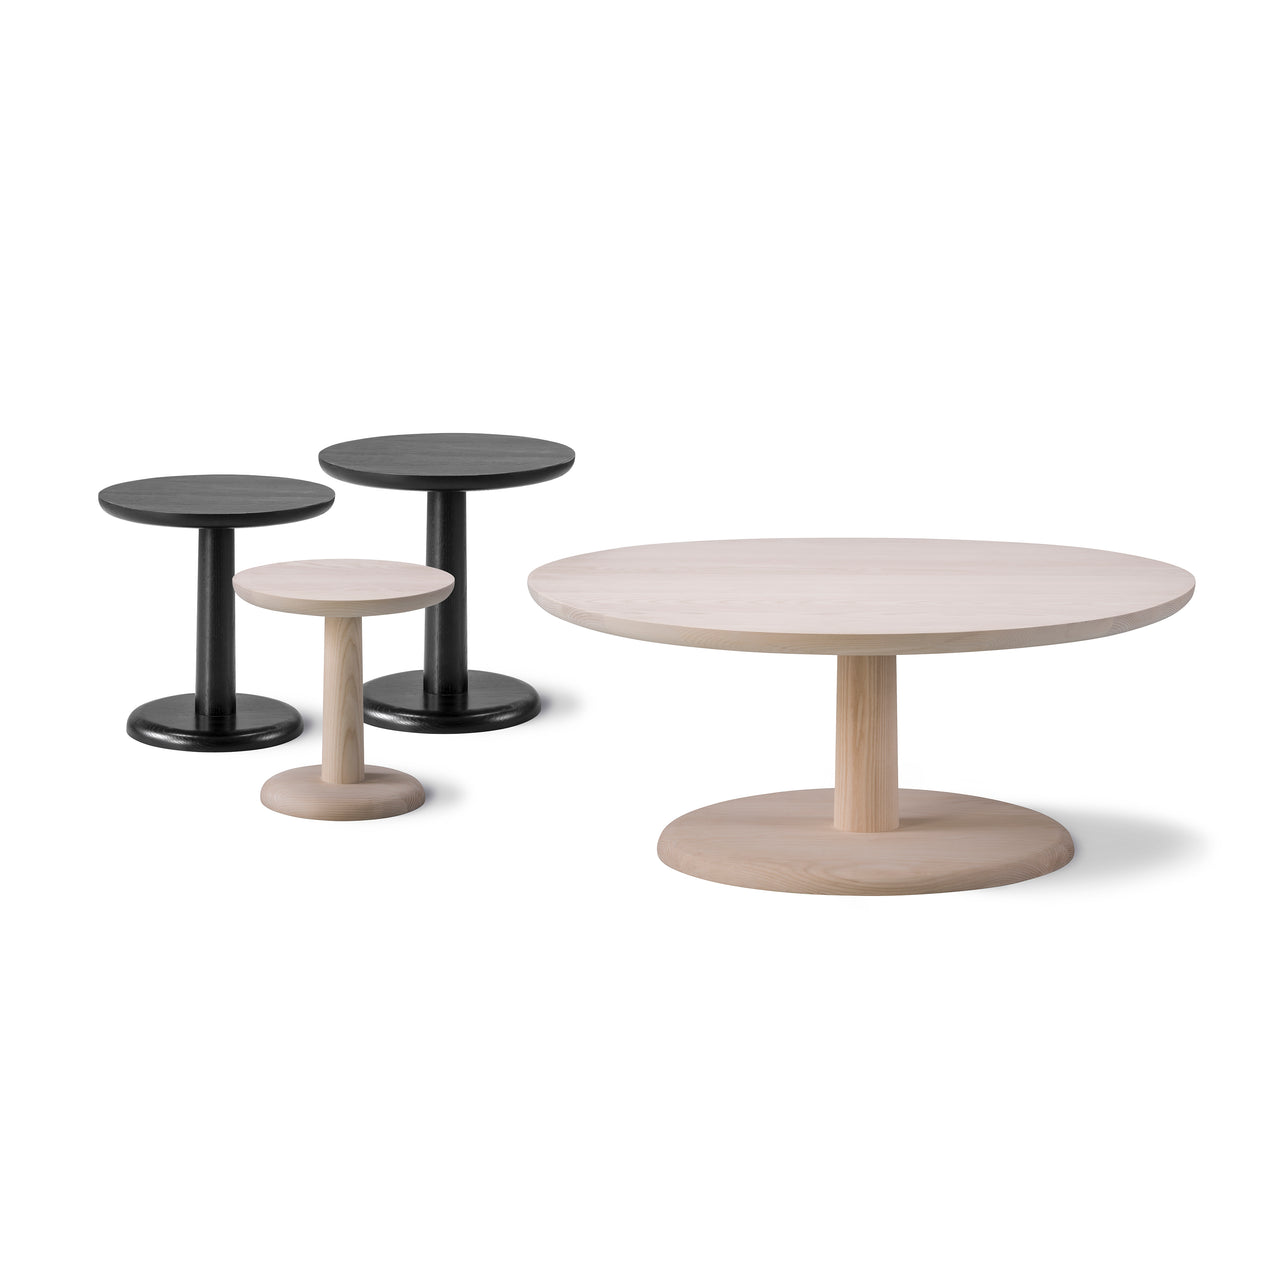 Pon Coffee Table | Buy Fredericia online at A+R